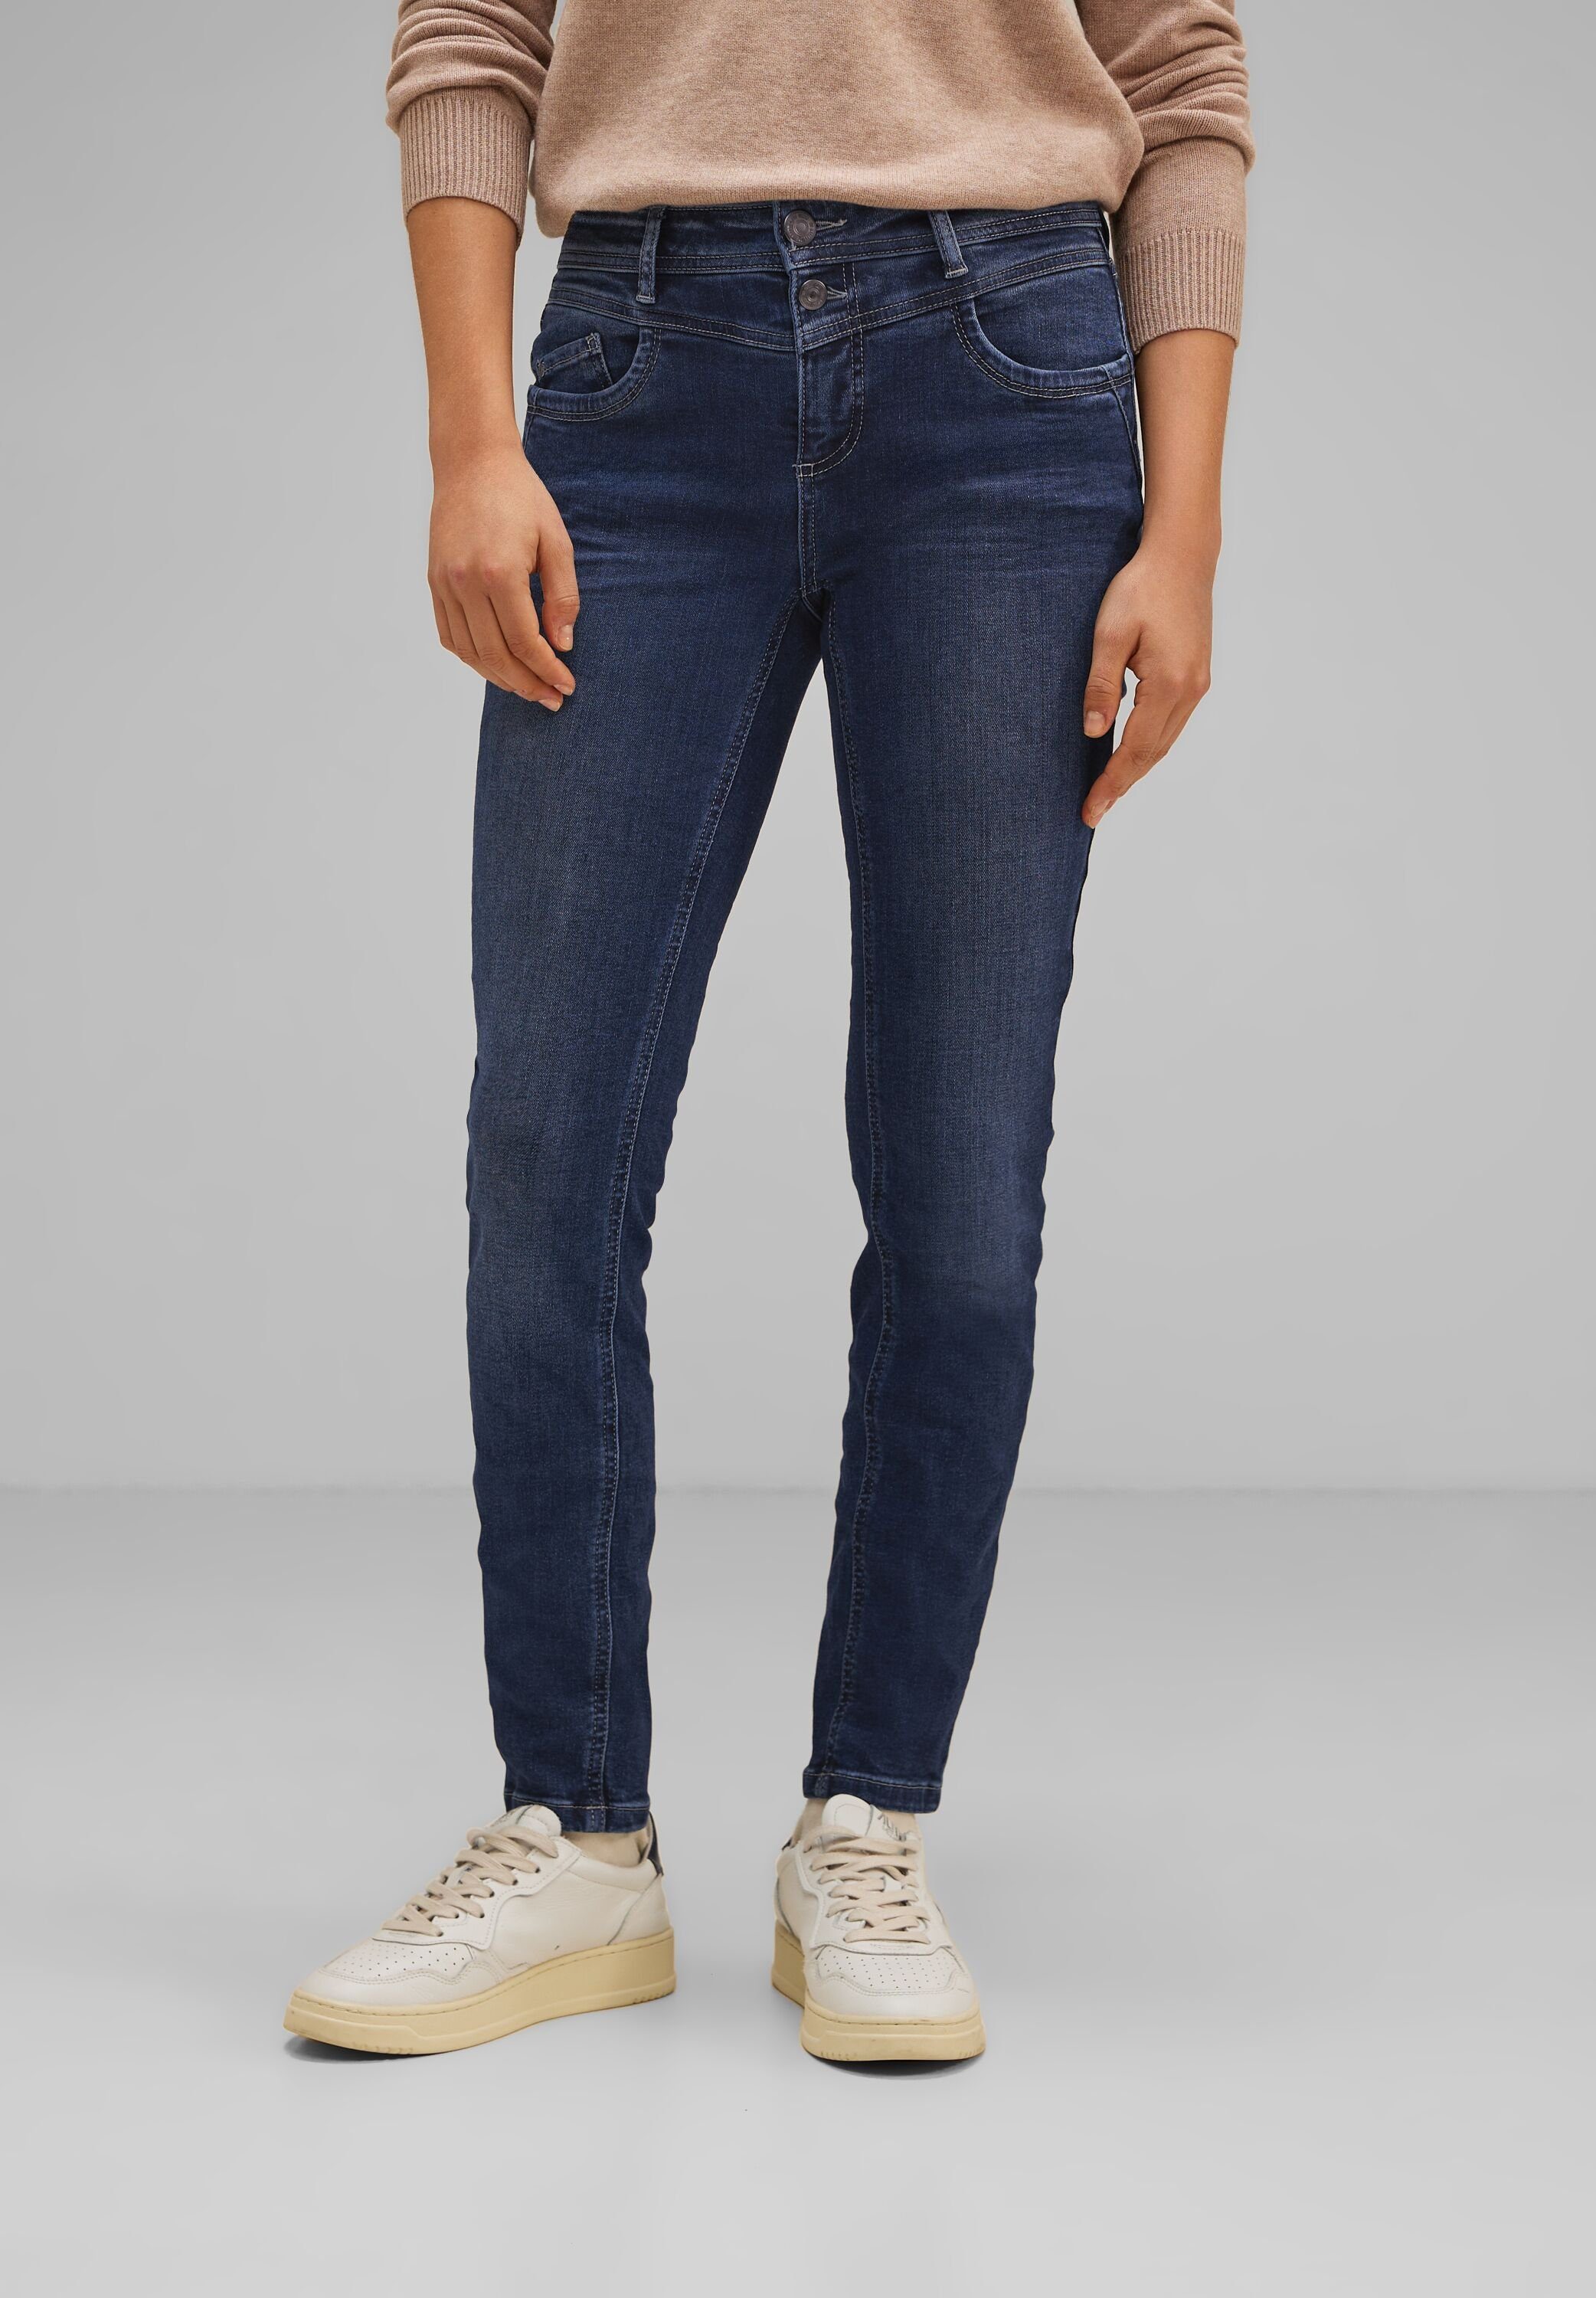 ONE Materialmix STREET Slim-fit-Jeans softer